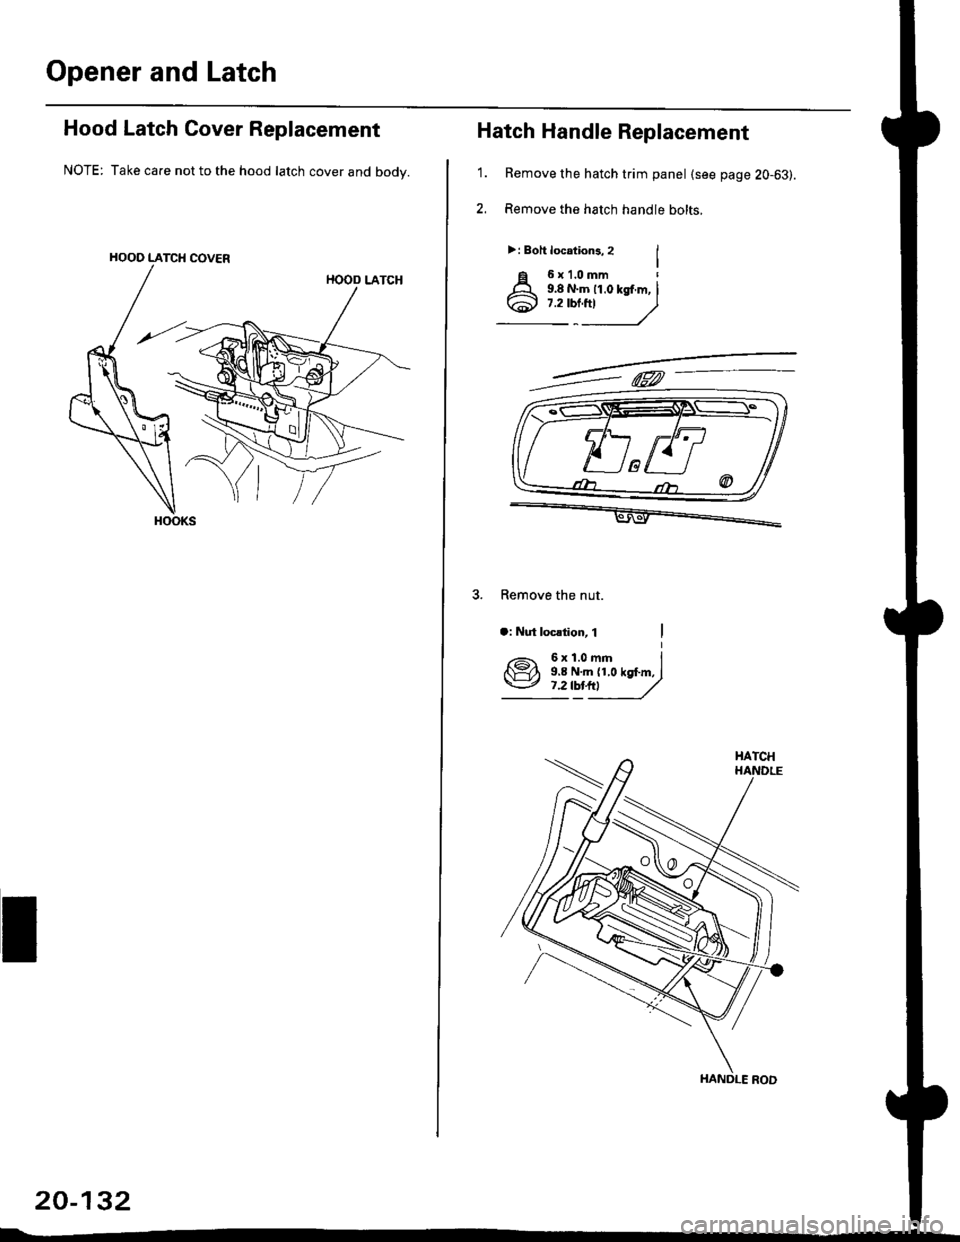 HONDA CIVIC 2000 6.G Owners Manual Opener and Latch
Hood Latch Cover Replacement
NOTE: Take ca.e not to the hood latch cover and body.
HOOO LATCH COVER
HOOD LATCH
I
20-132
1.
Hatch Handle Replacement
Remove the hatch trim panel {see p